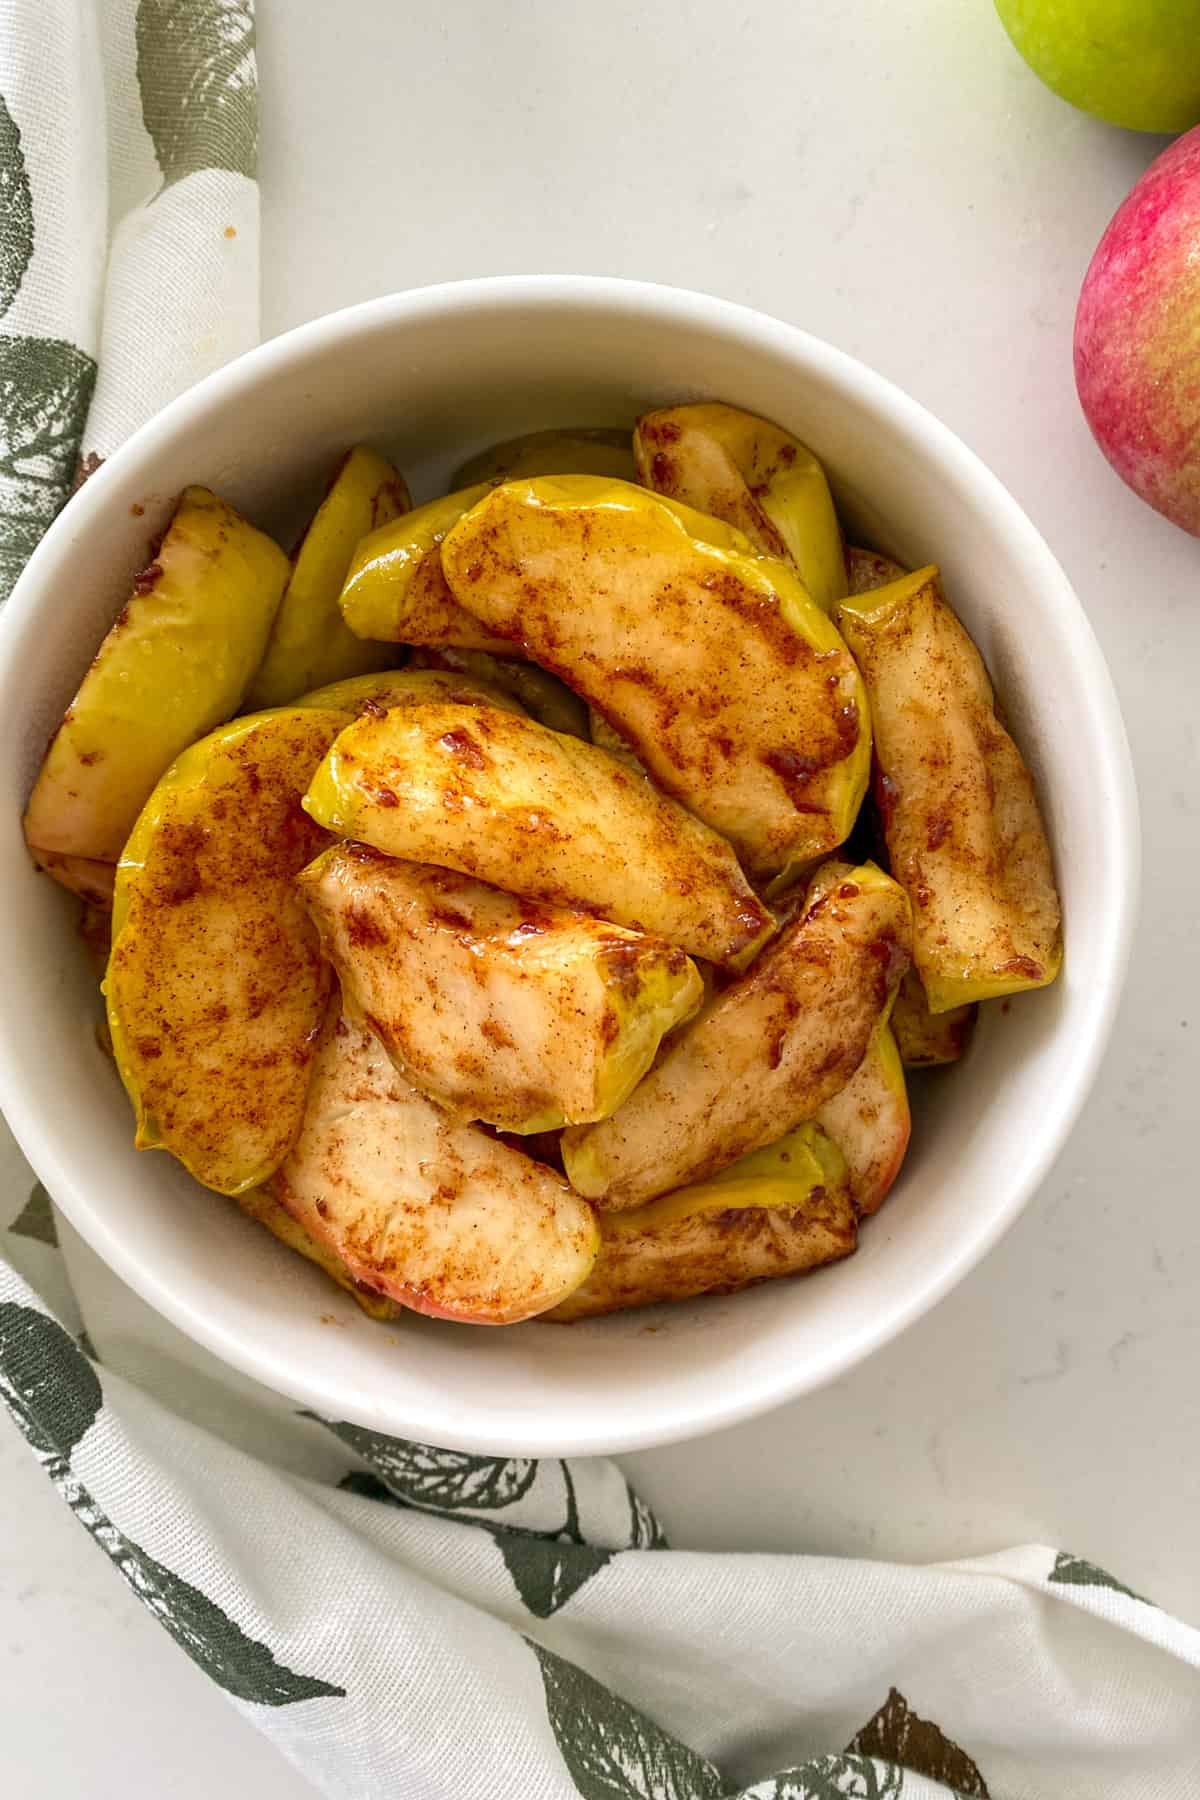 Apple wedges coated in sweet marinade in white serving bowl.